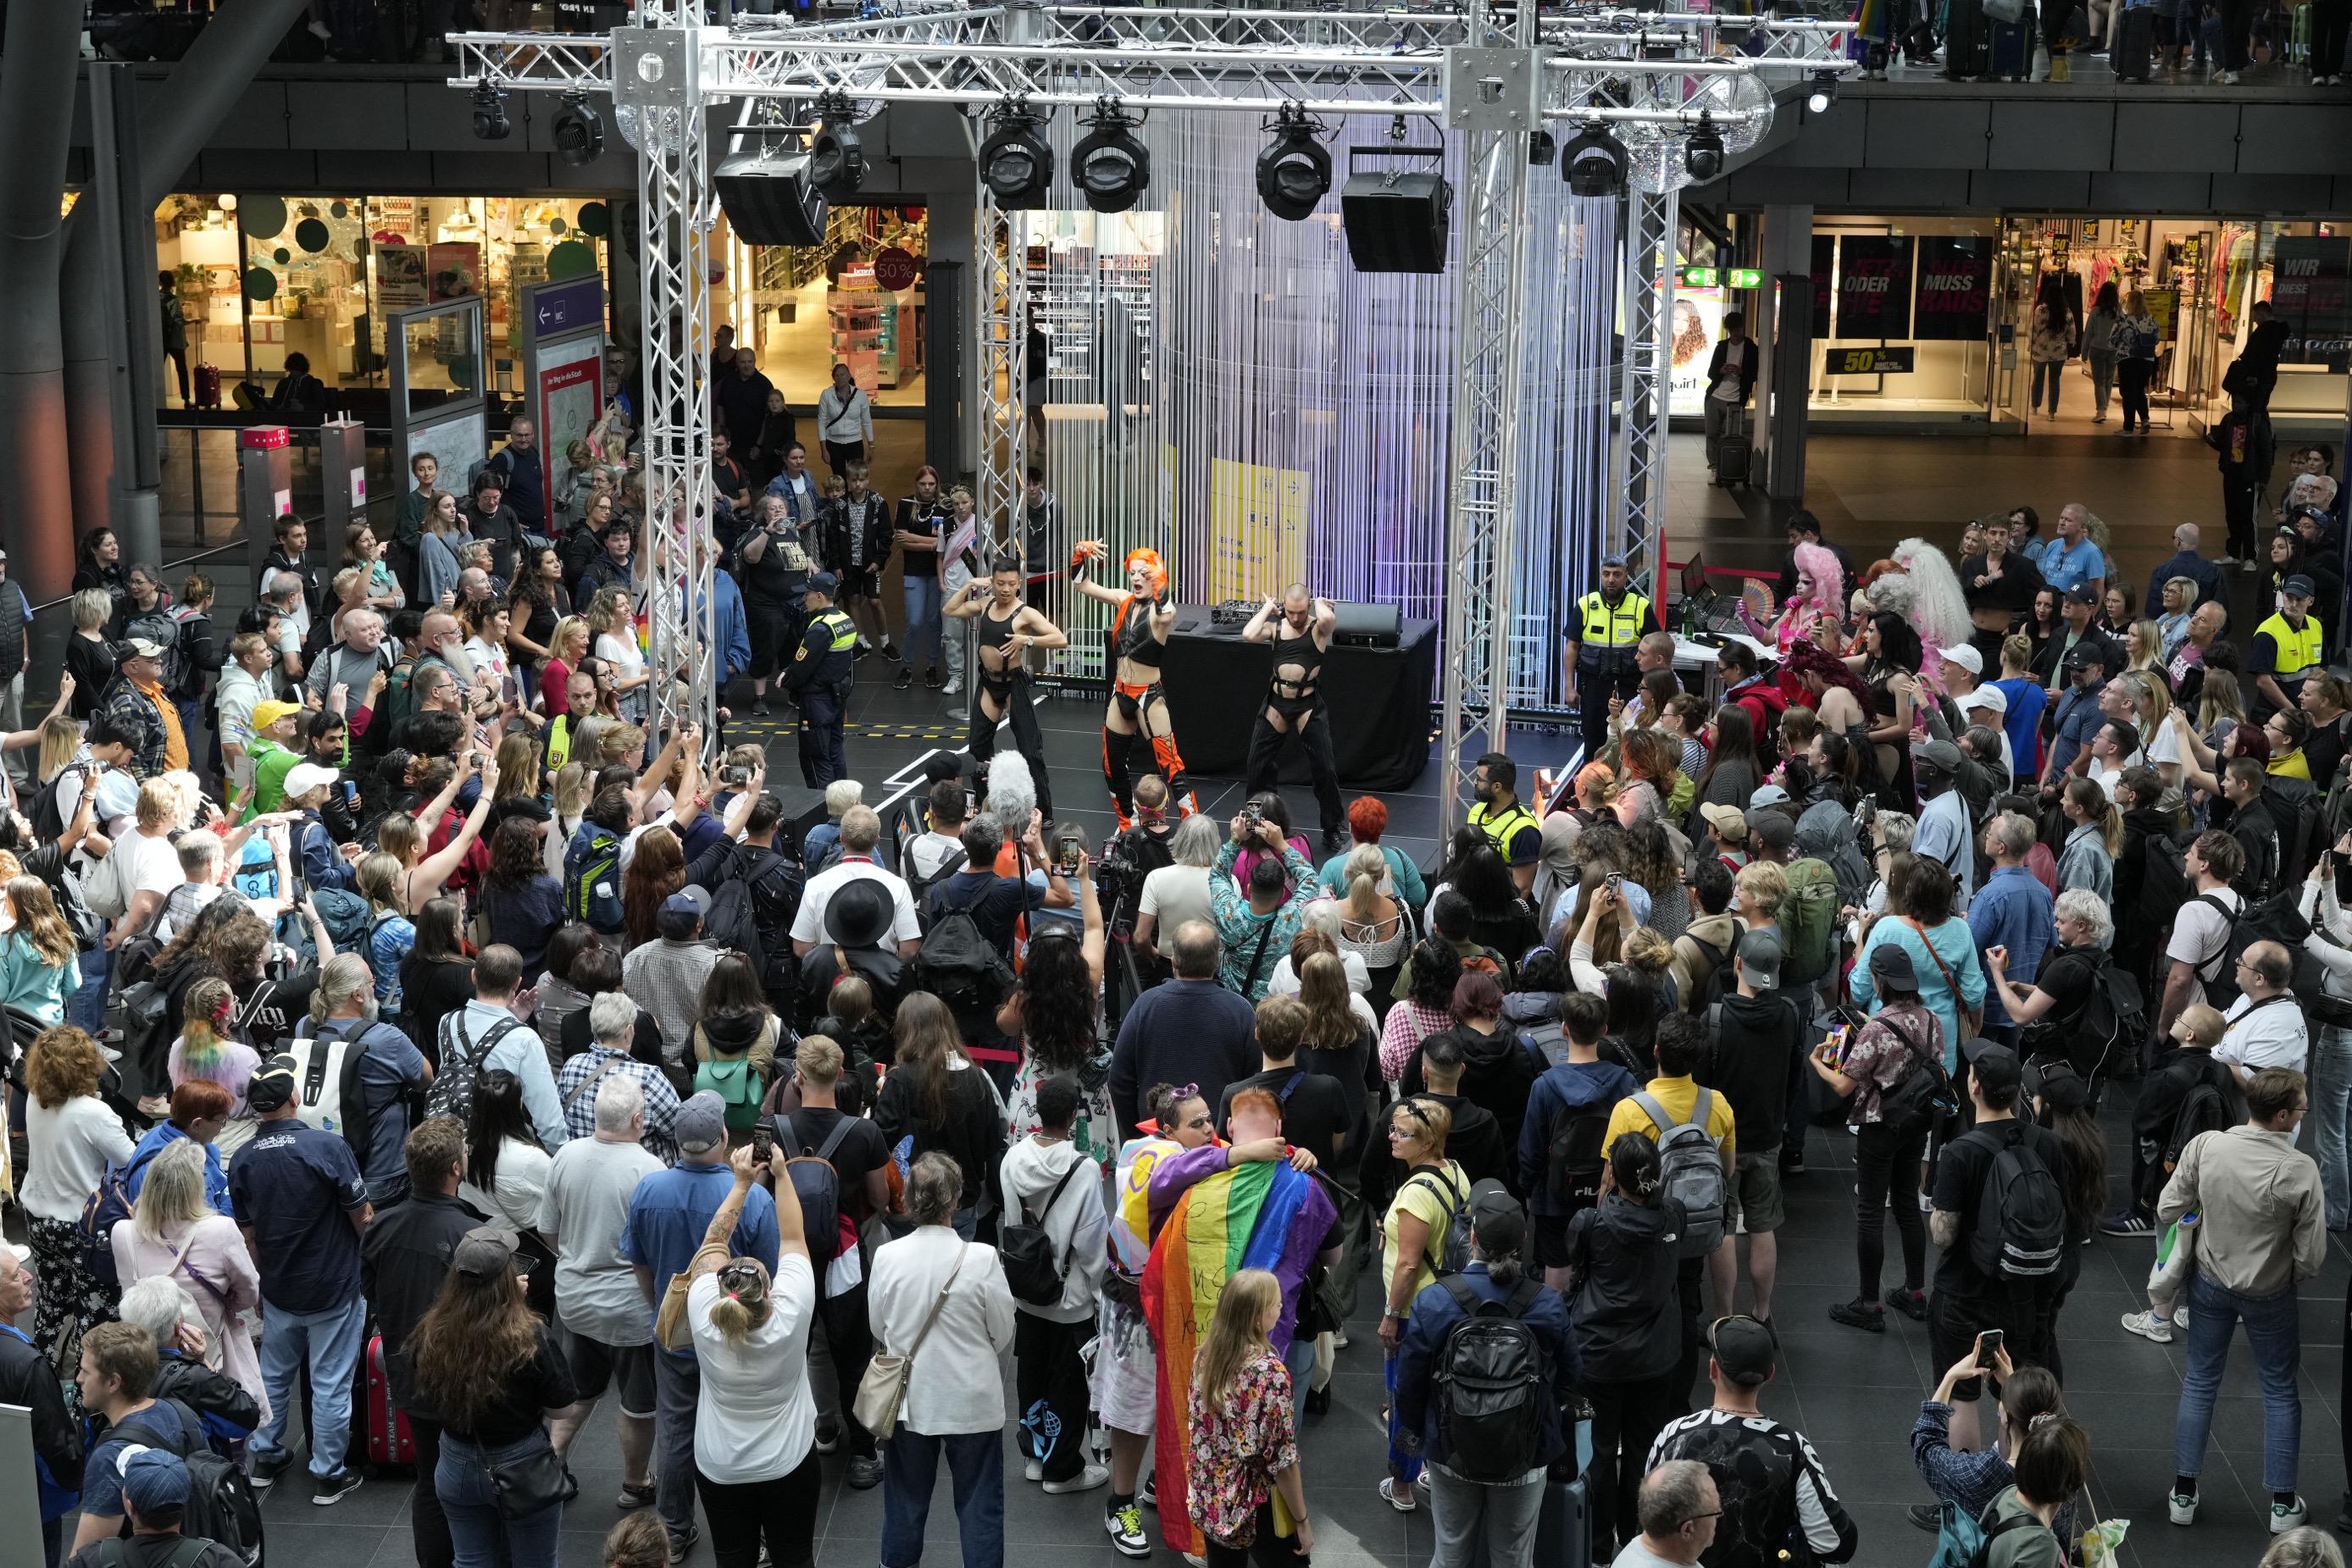 Drag queens dance and sing on the event stage at Berlin Central Station, surrounded by spectators.	